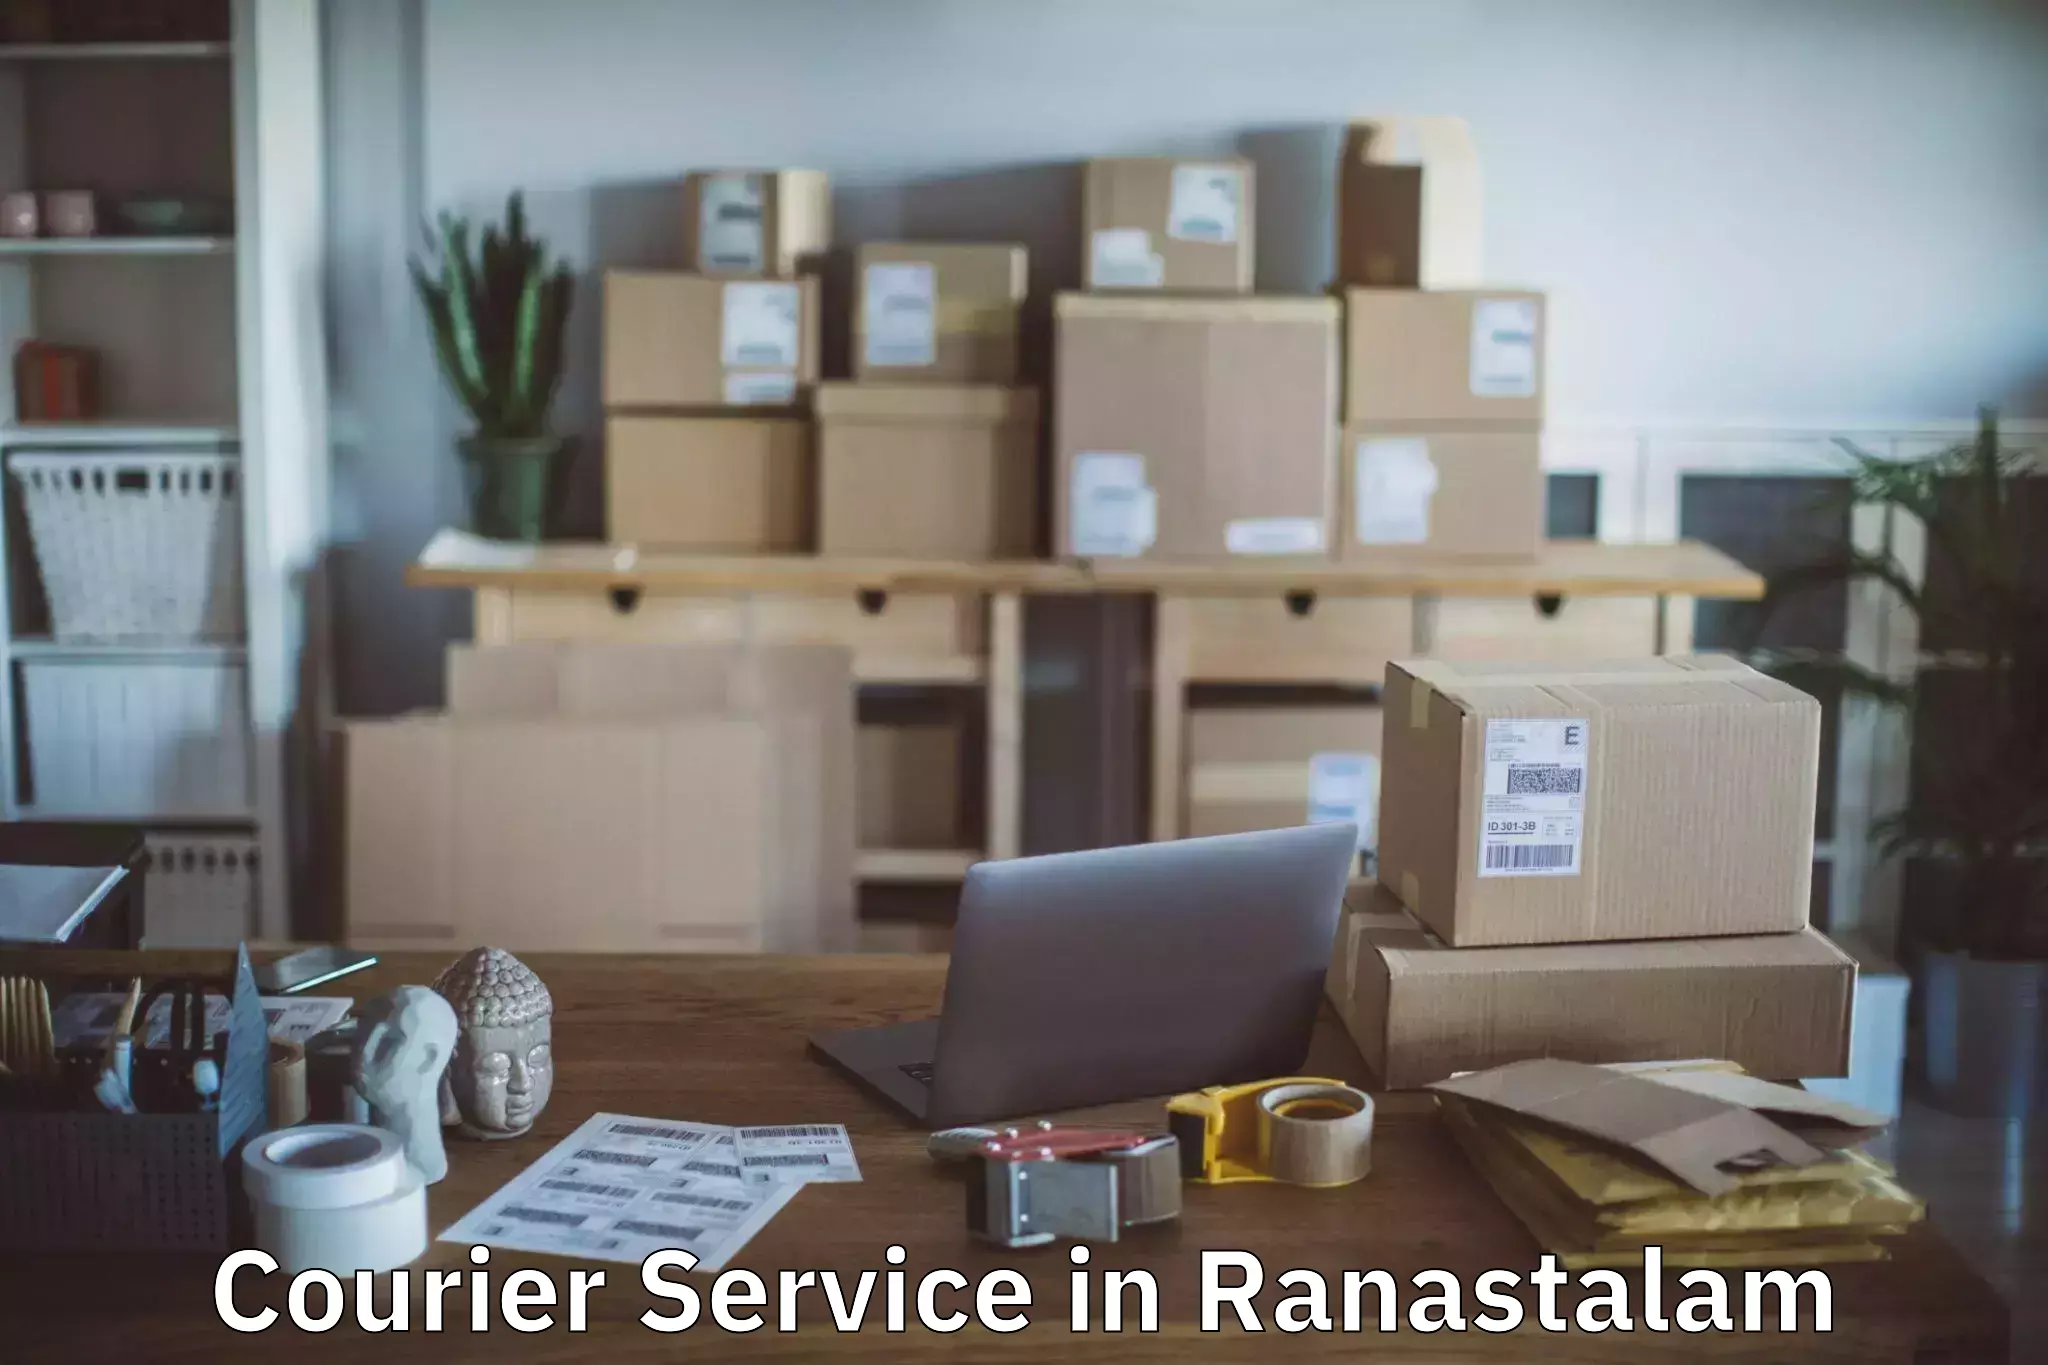 Parcel service for businesses in Ranastalam